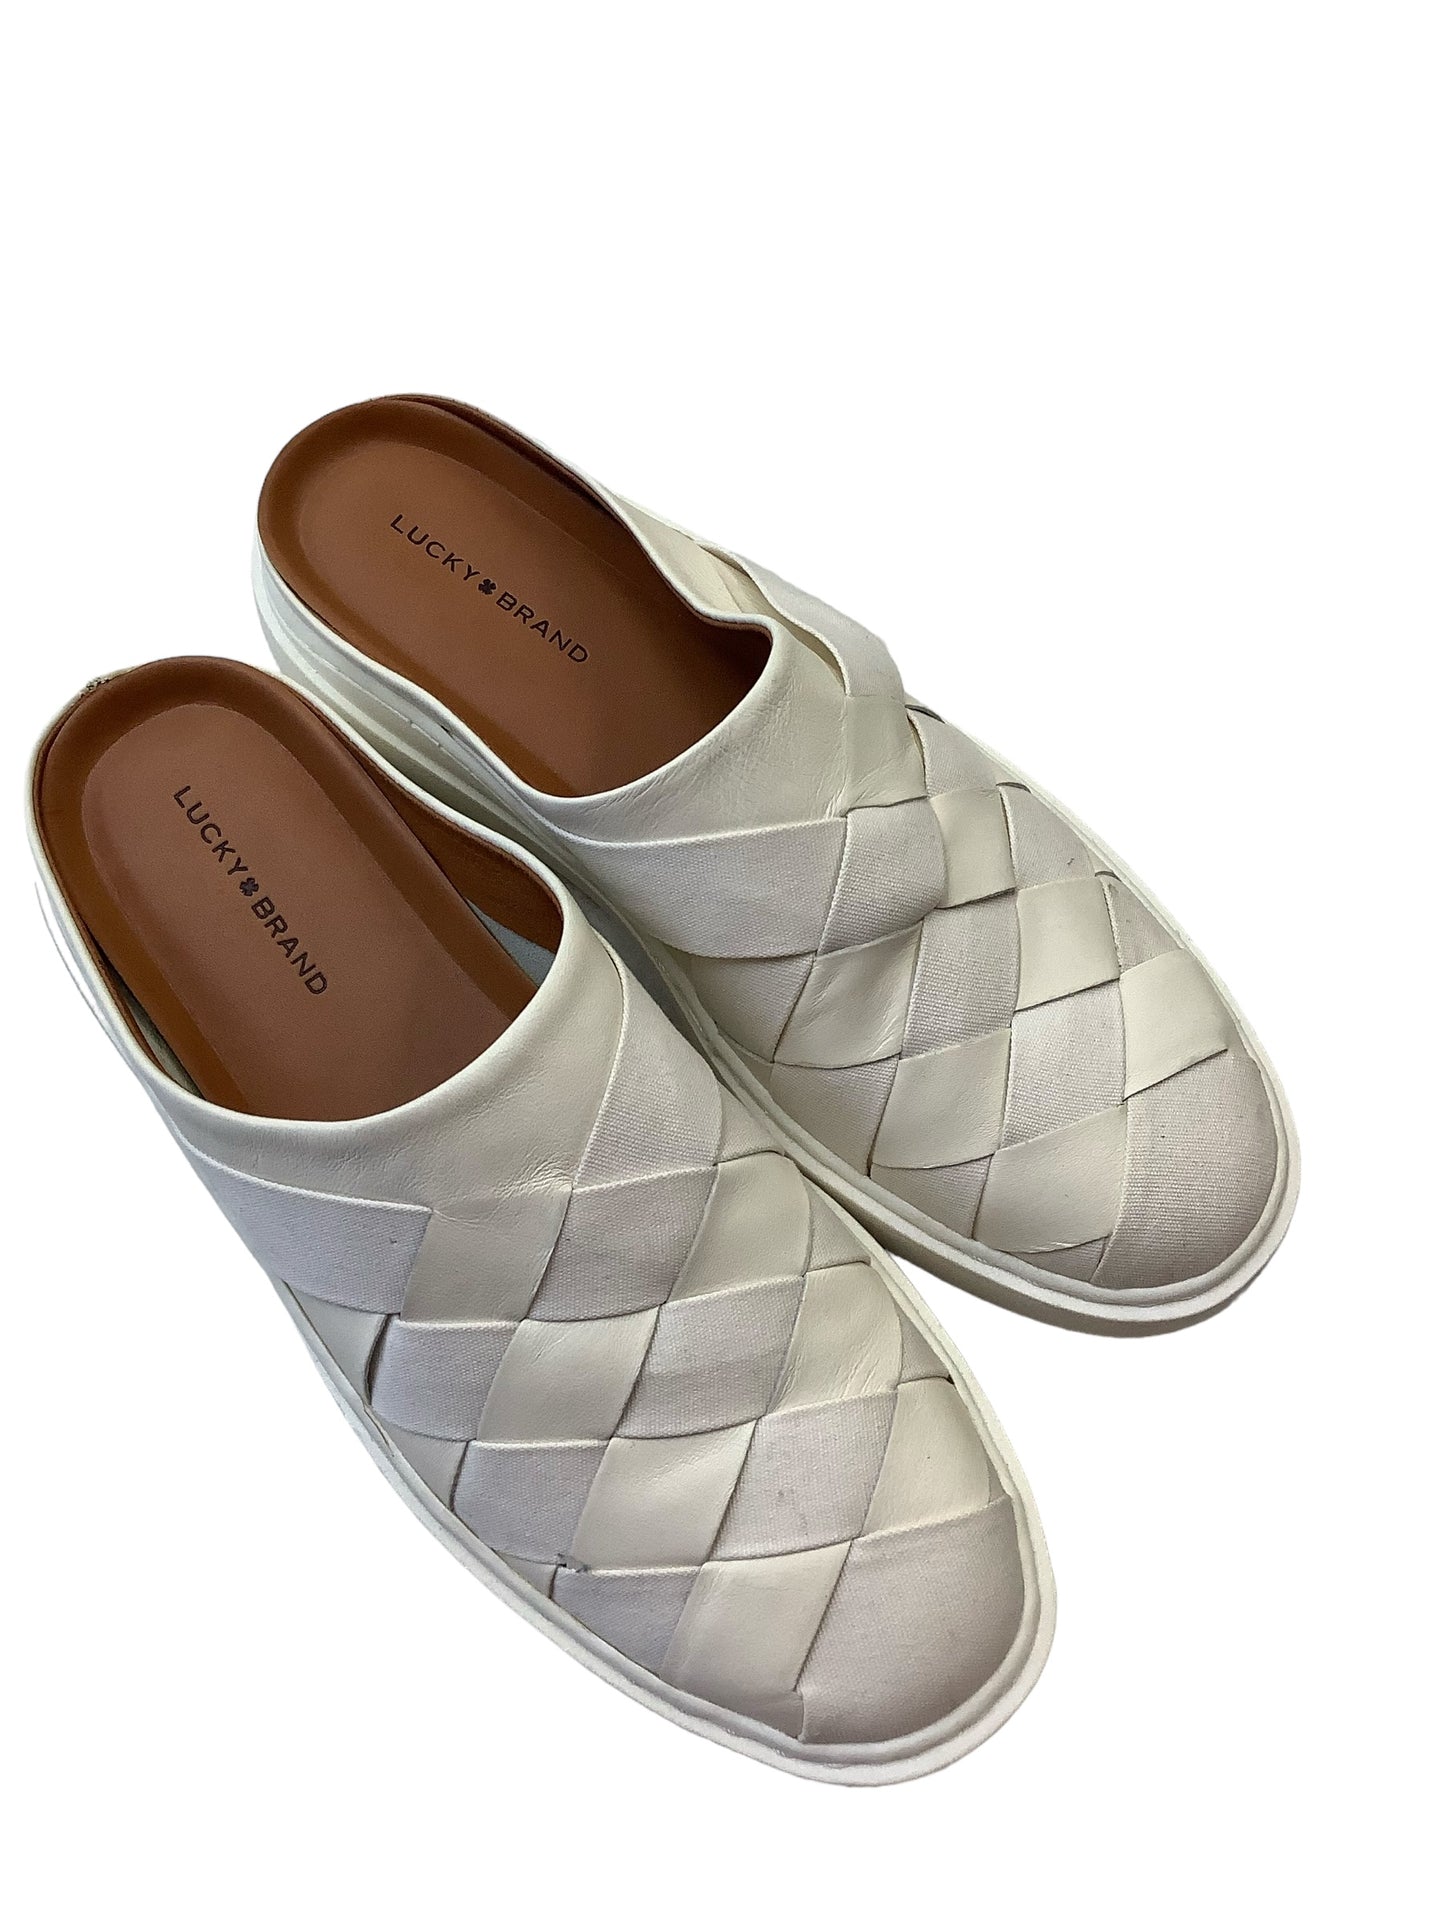 Shoes Flats Mule & Slide By Lucky Brand  Size: 9.5